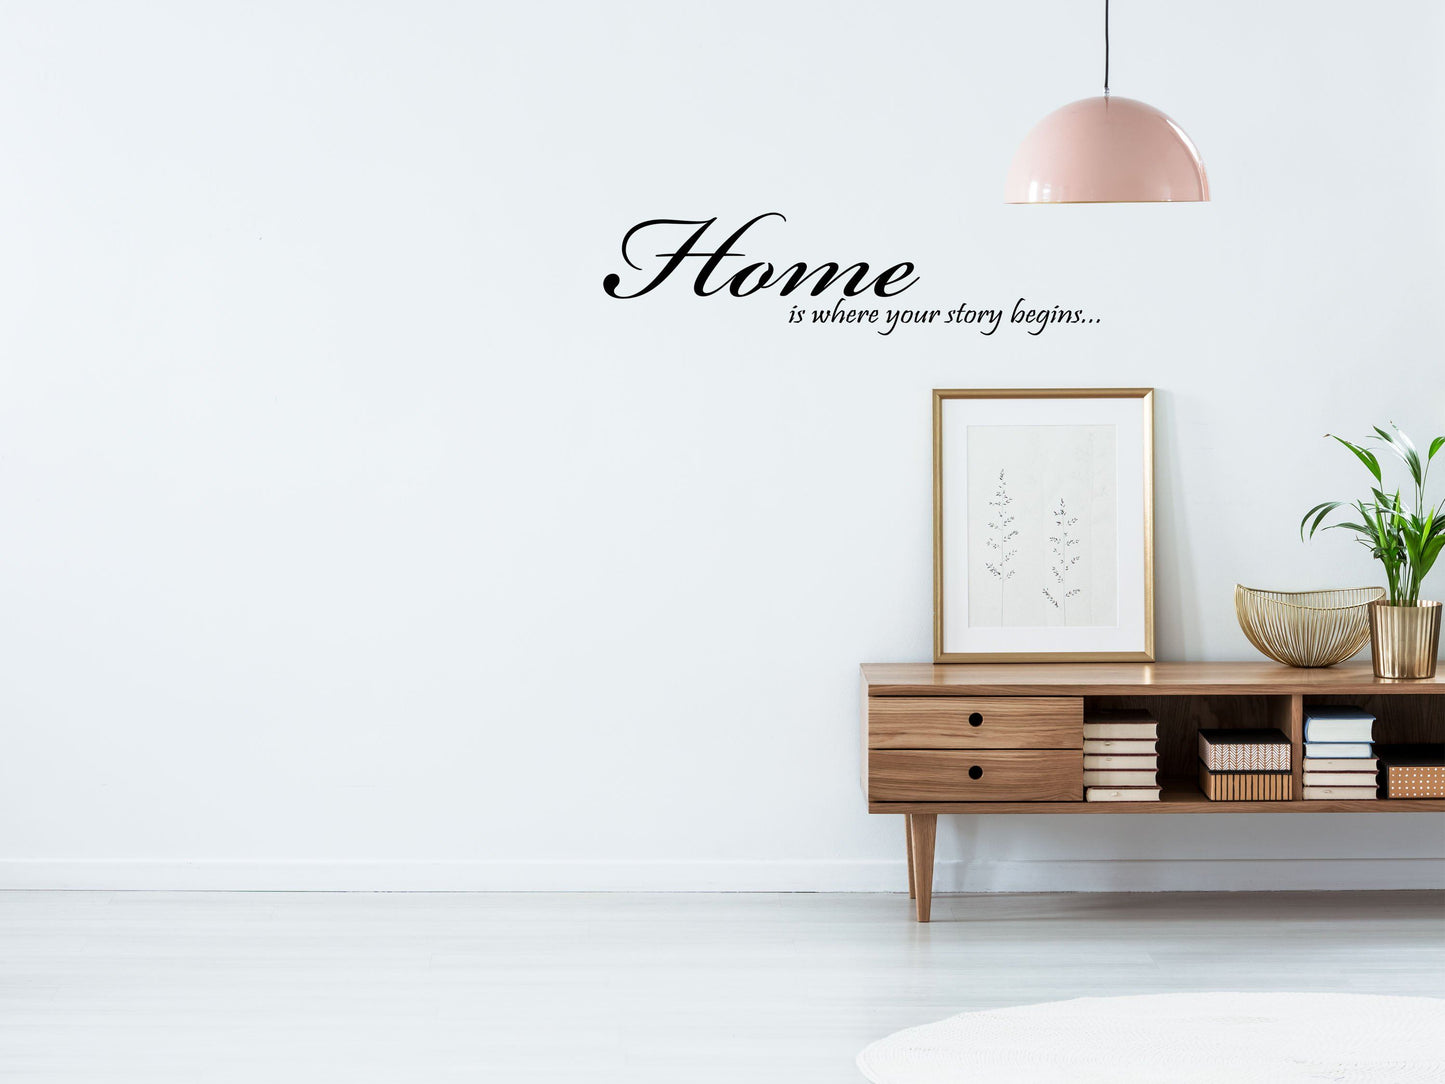 Home Is Where Your Story Begins - Story Begins Vinyl Decal - Home Wall Decal - Cute Home Decor Vinyl Wall Decal Done 